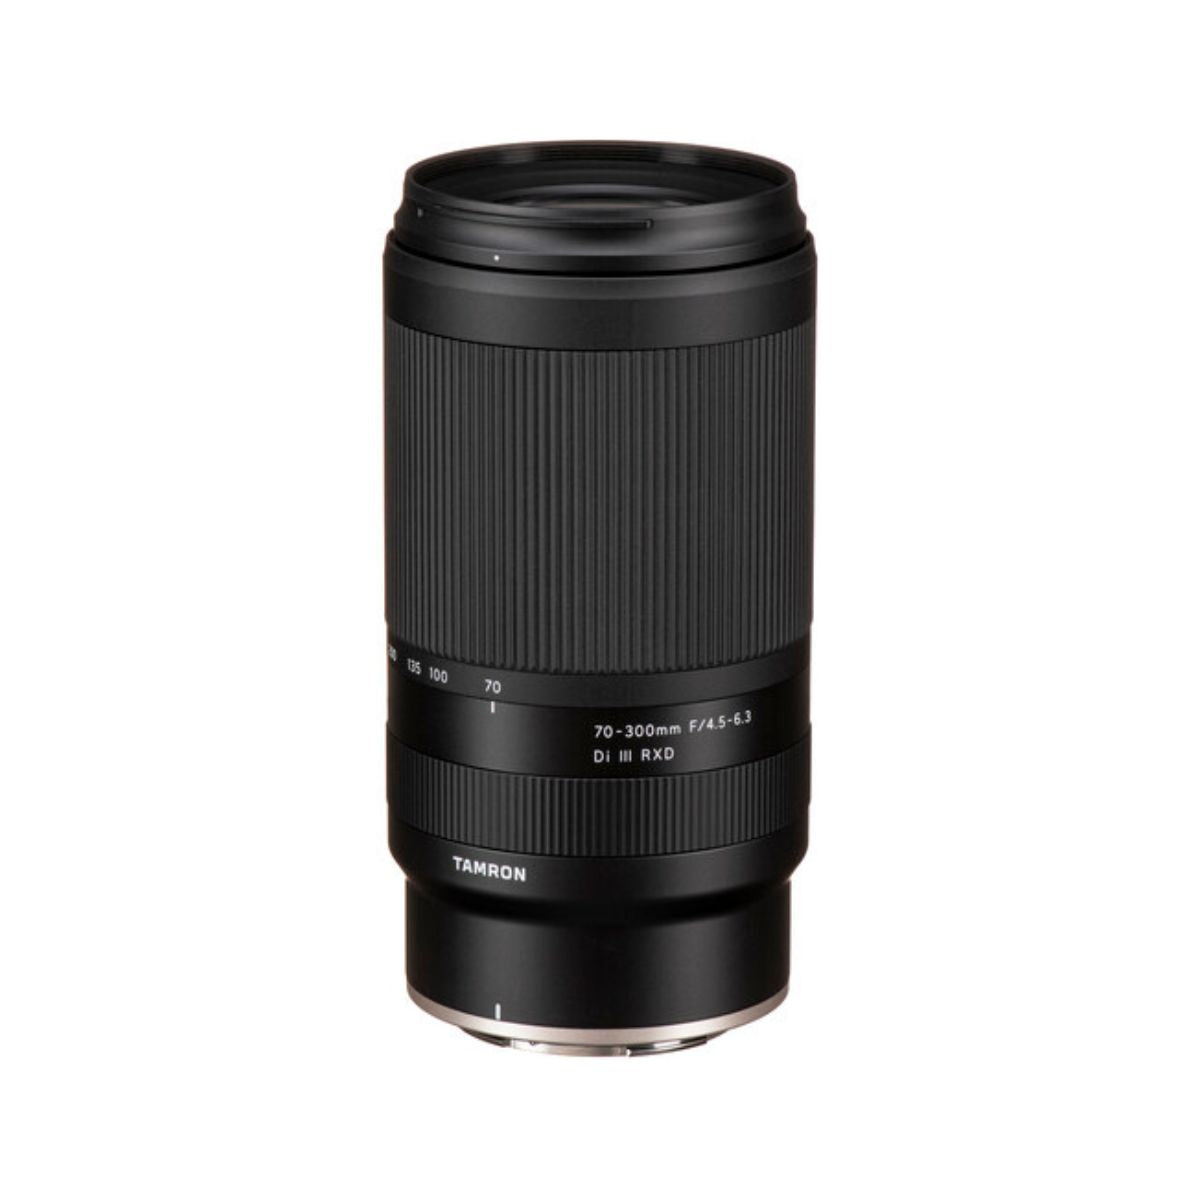 Tamron 70-300mm f/4.5-6.3 Di III RXD Nikon Z-Mount Full Frame AF Autofocus Dynamic Telephoto Zoom Lens for Mirrorless Cameras | A047 / A047Z